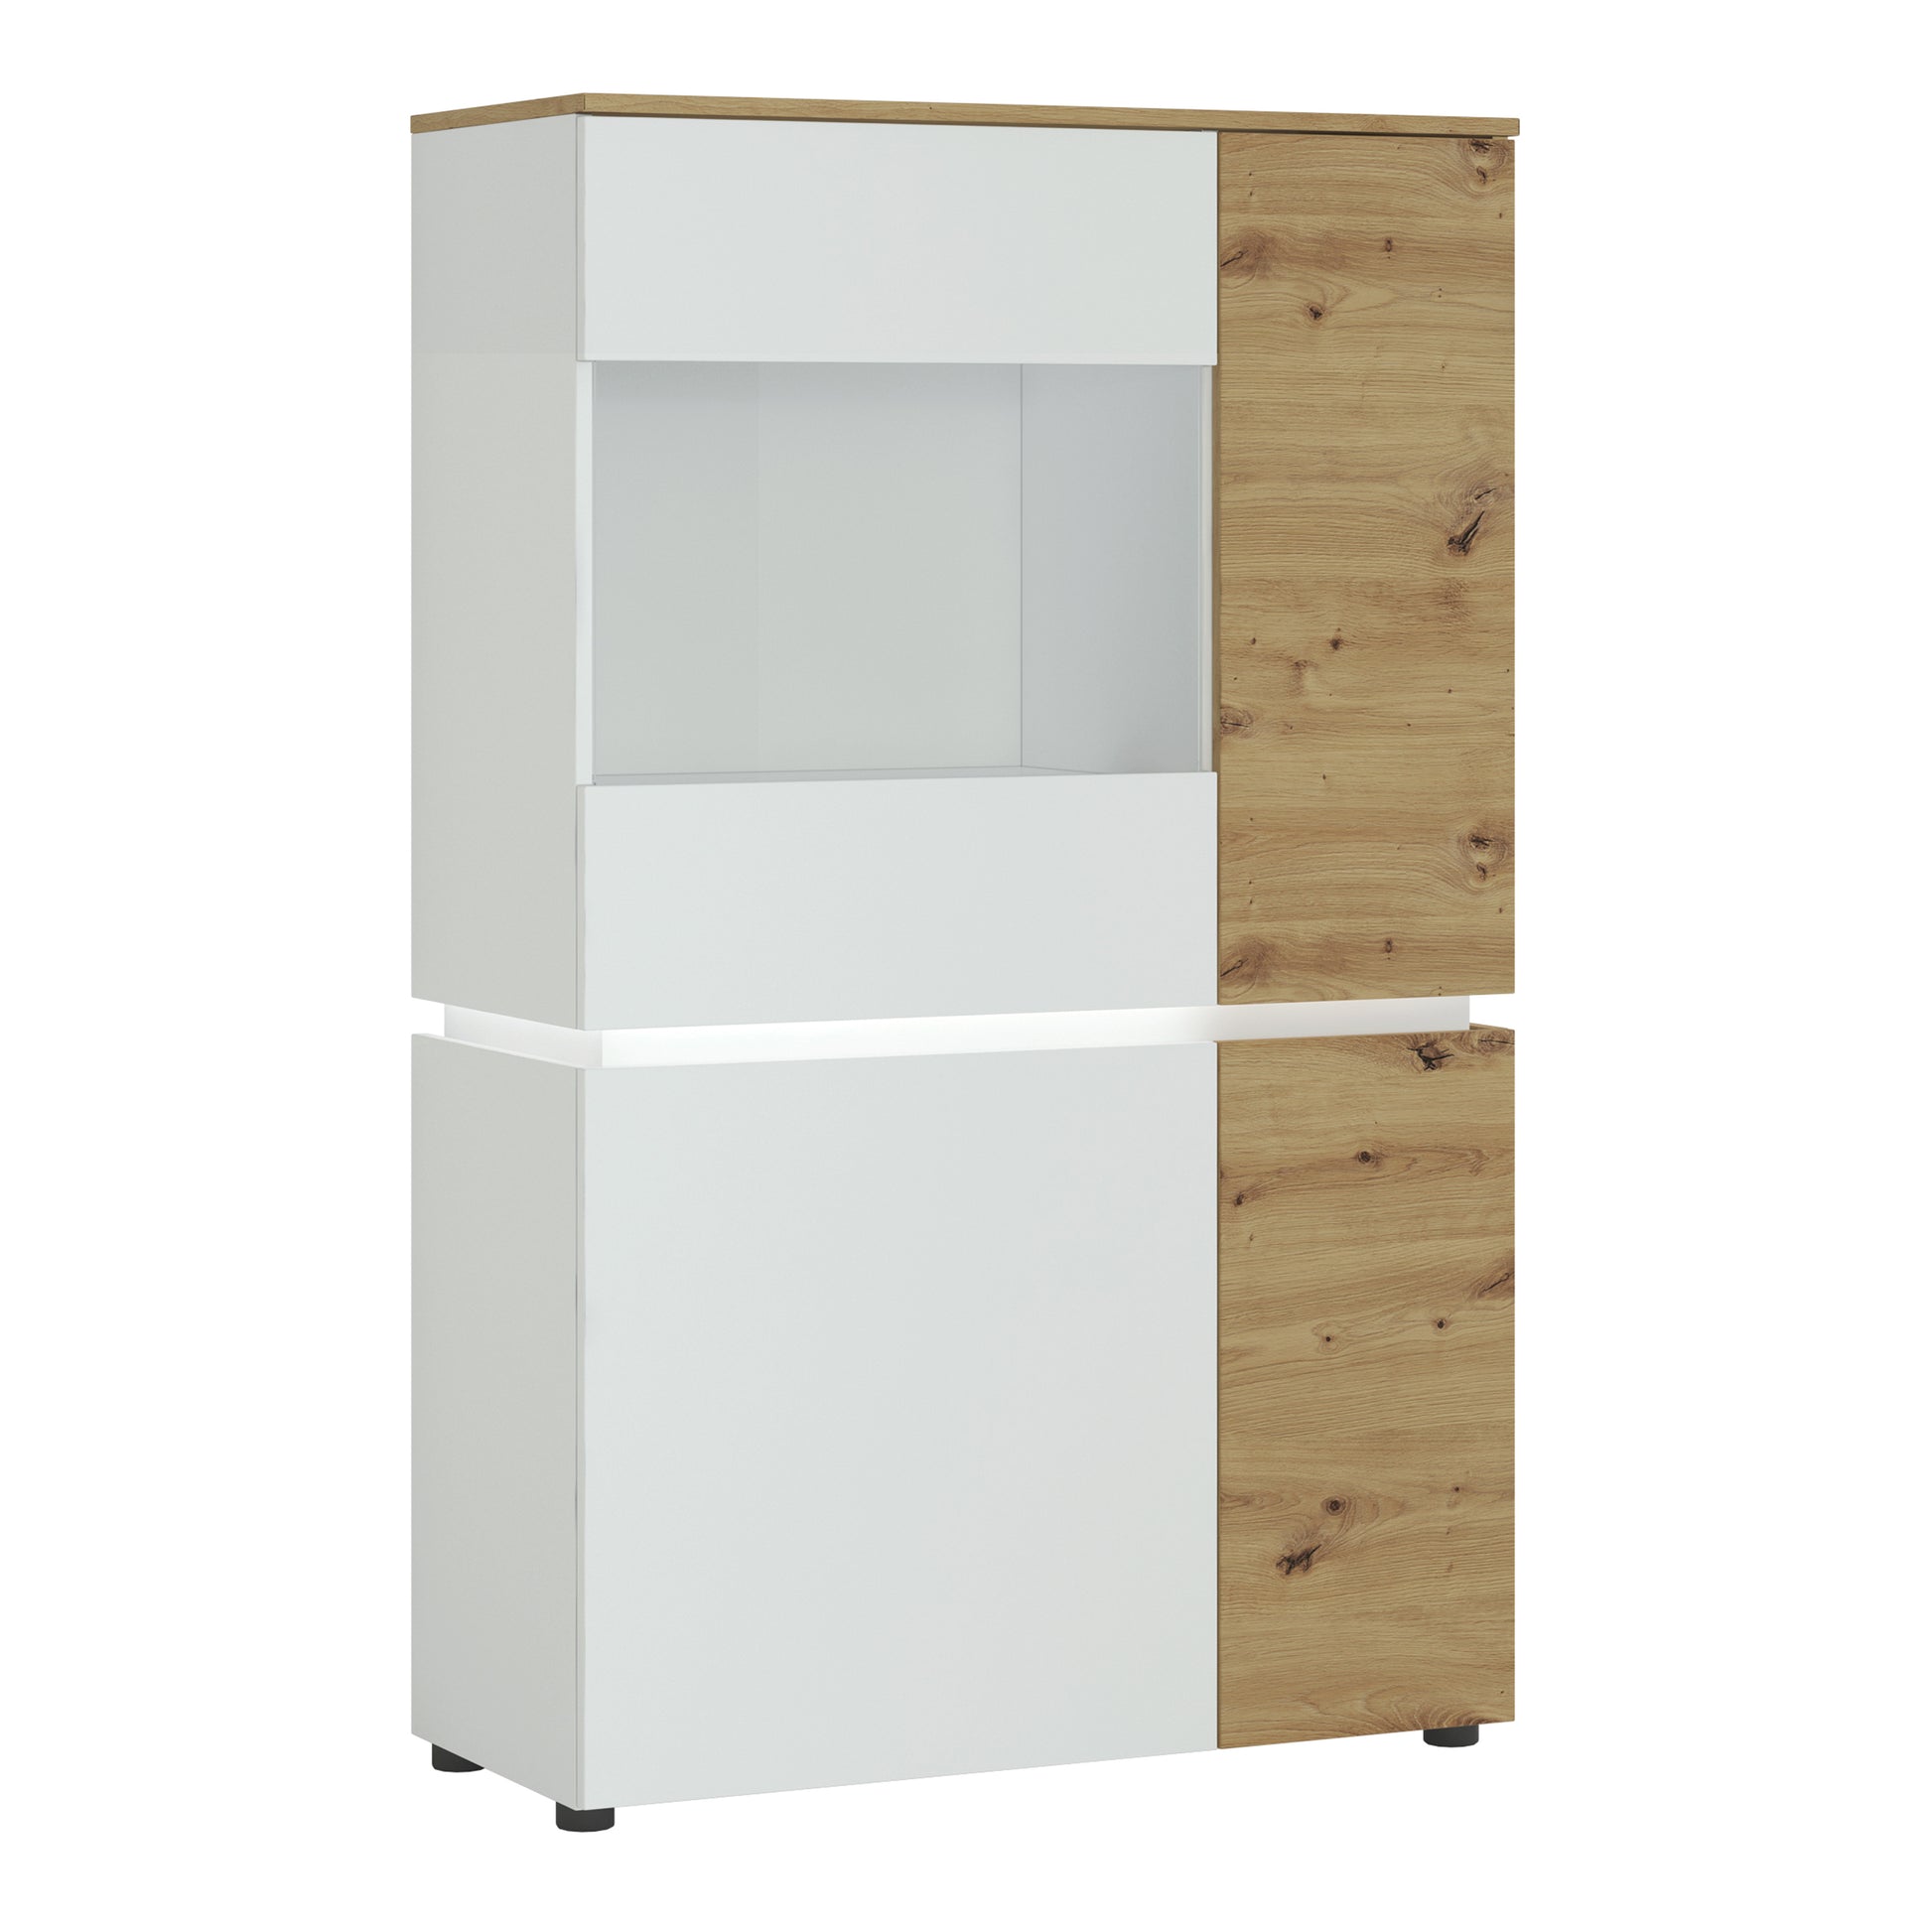 Luci Bright Luci 4 door low display cabinet (including LED lighting) in White and Oak